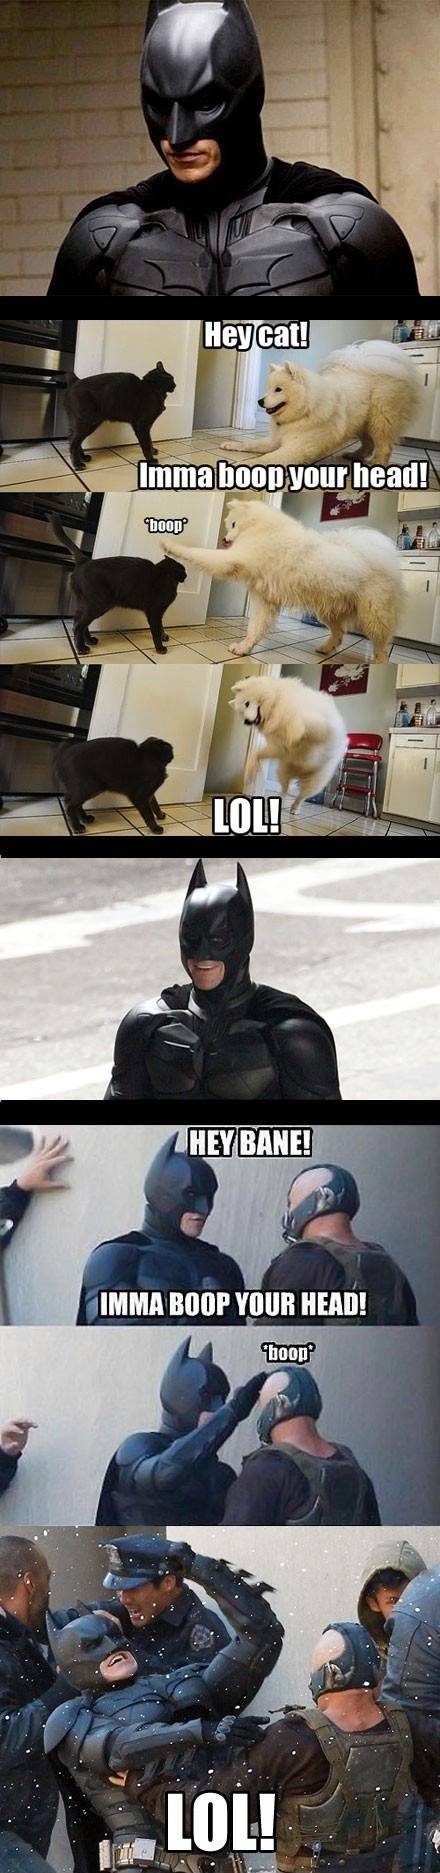 Where Batman gets his fighting moves from...